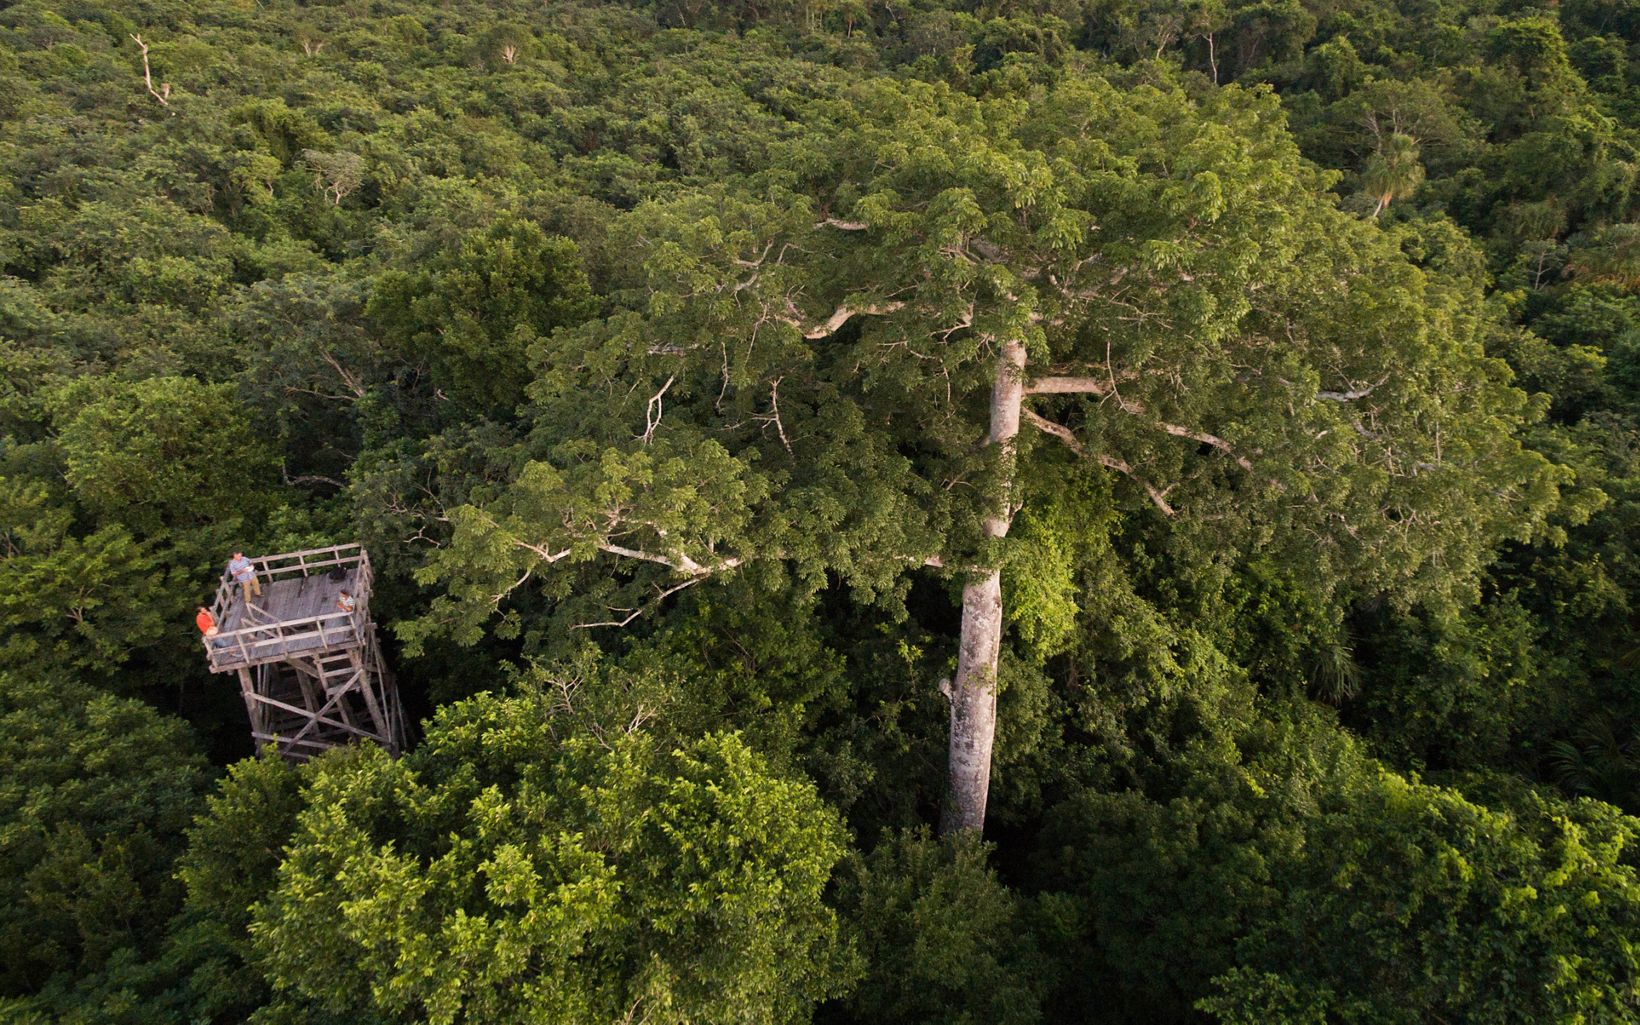 Protecting tropical forests is an urgent task. Although it may seem counterintuitive, better logging practices may become one of the most powerful tools we have to curb deforestation and climate change. © Erich Schlegel